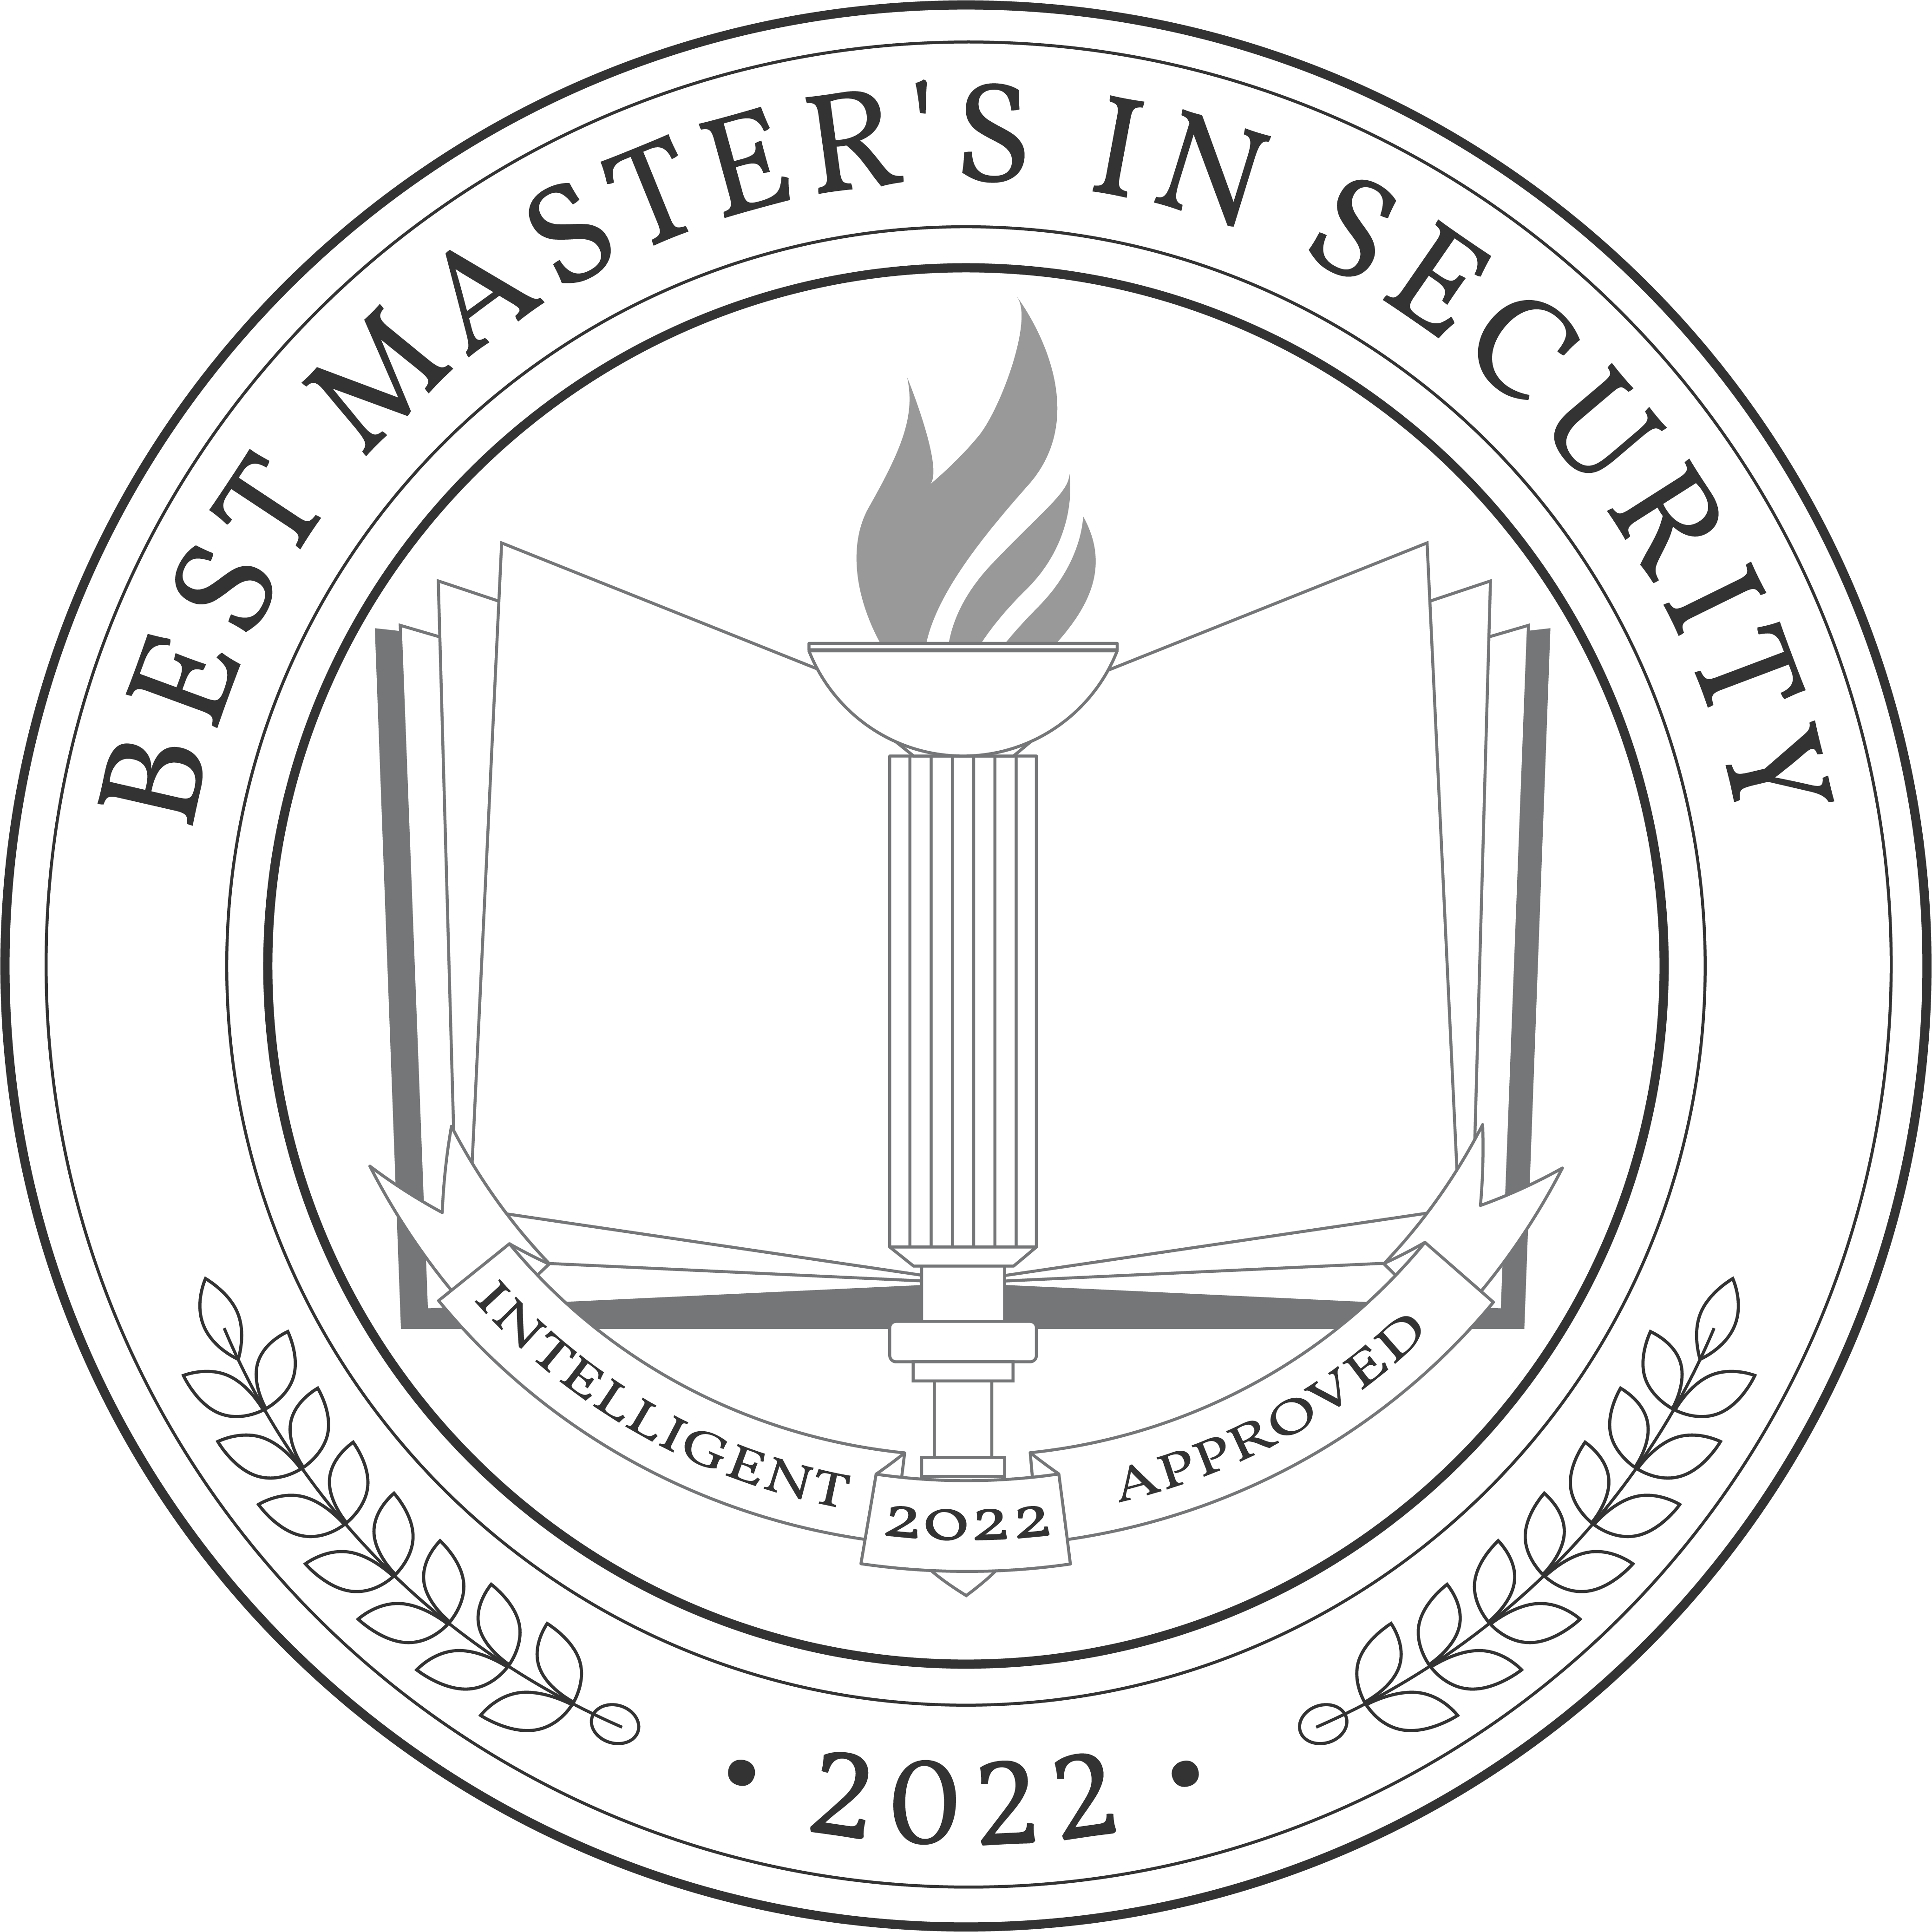 Best-Masters-in-Security-Badge.png